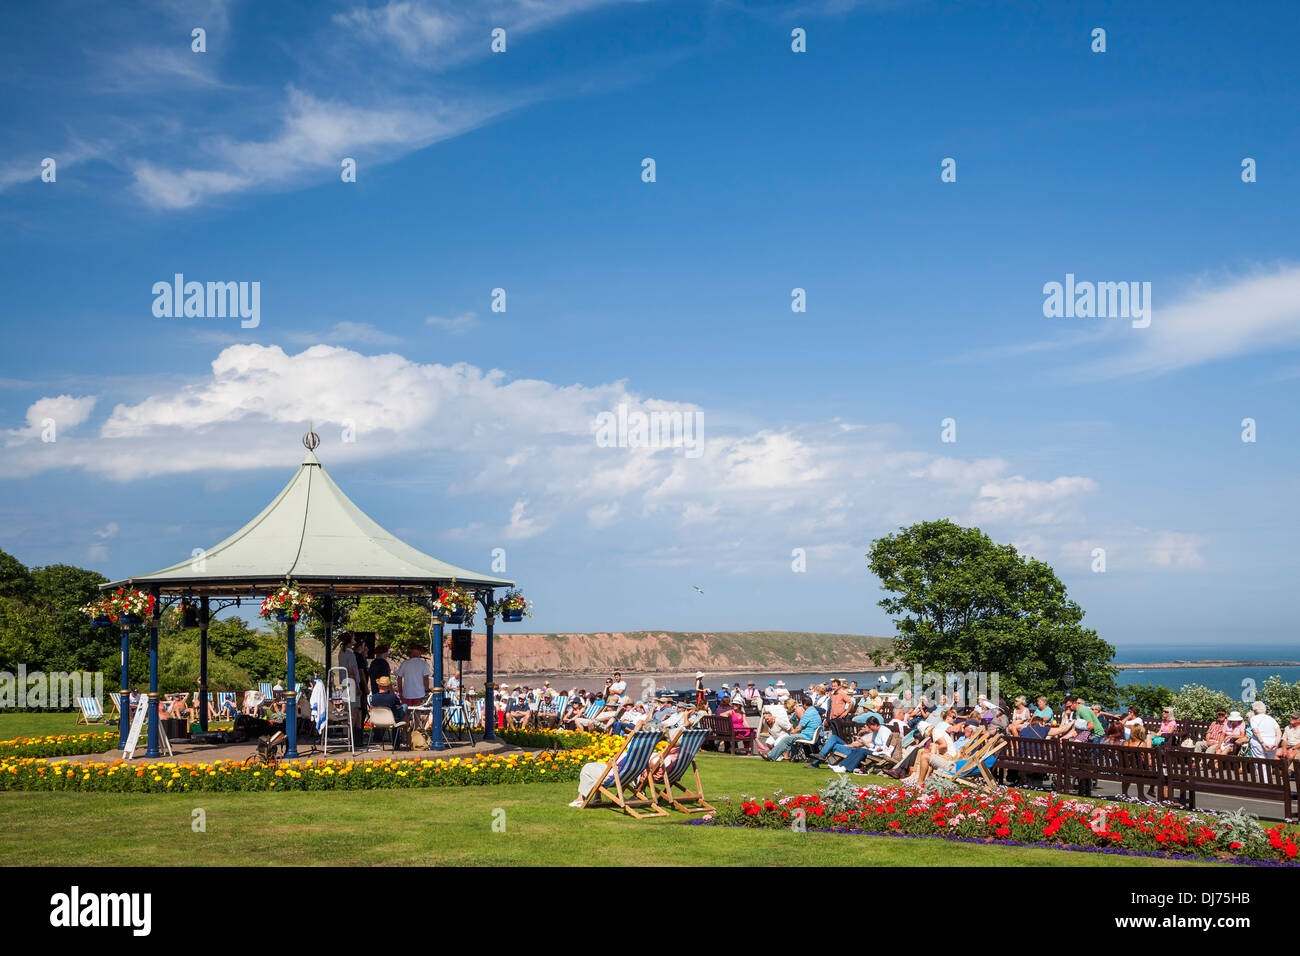 The Bandstand, Crescent Gardens, Filey, North Yorkshire. Stock Photo